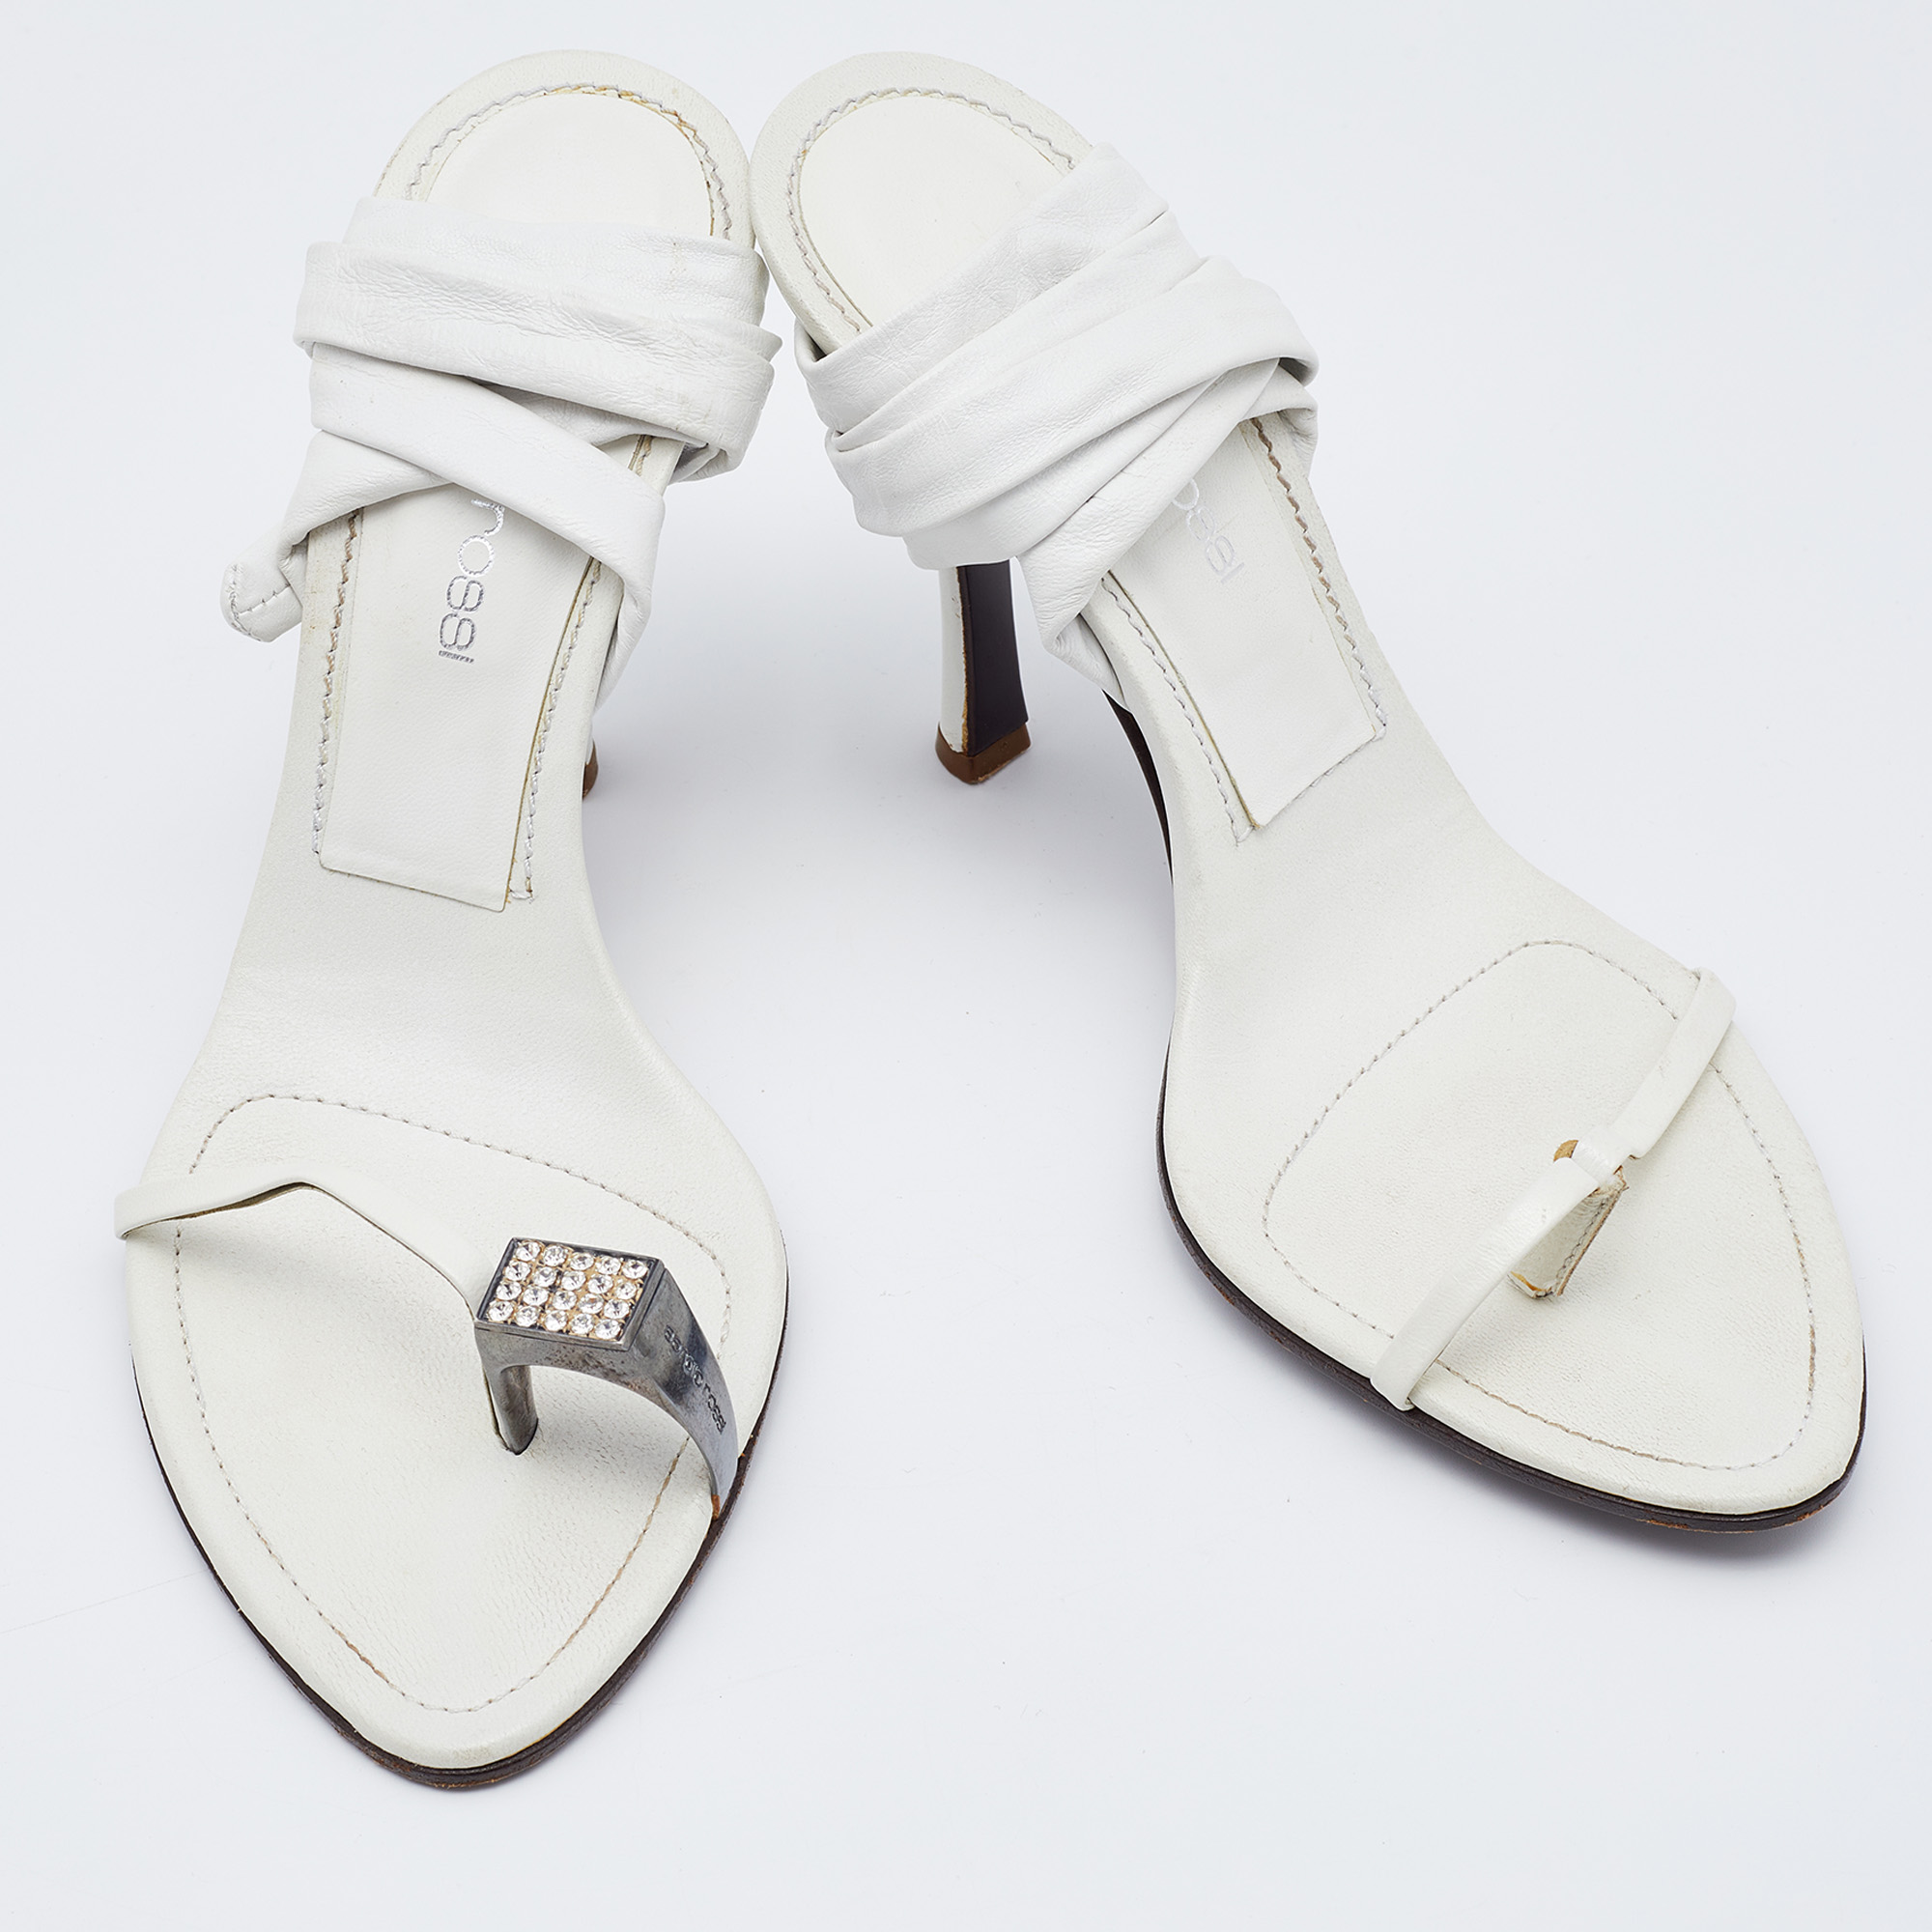 Sergio Rossi White Leather Ankle Wrap Sandals Size 38